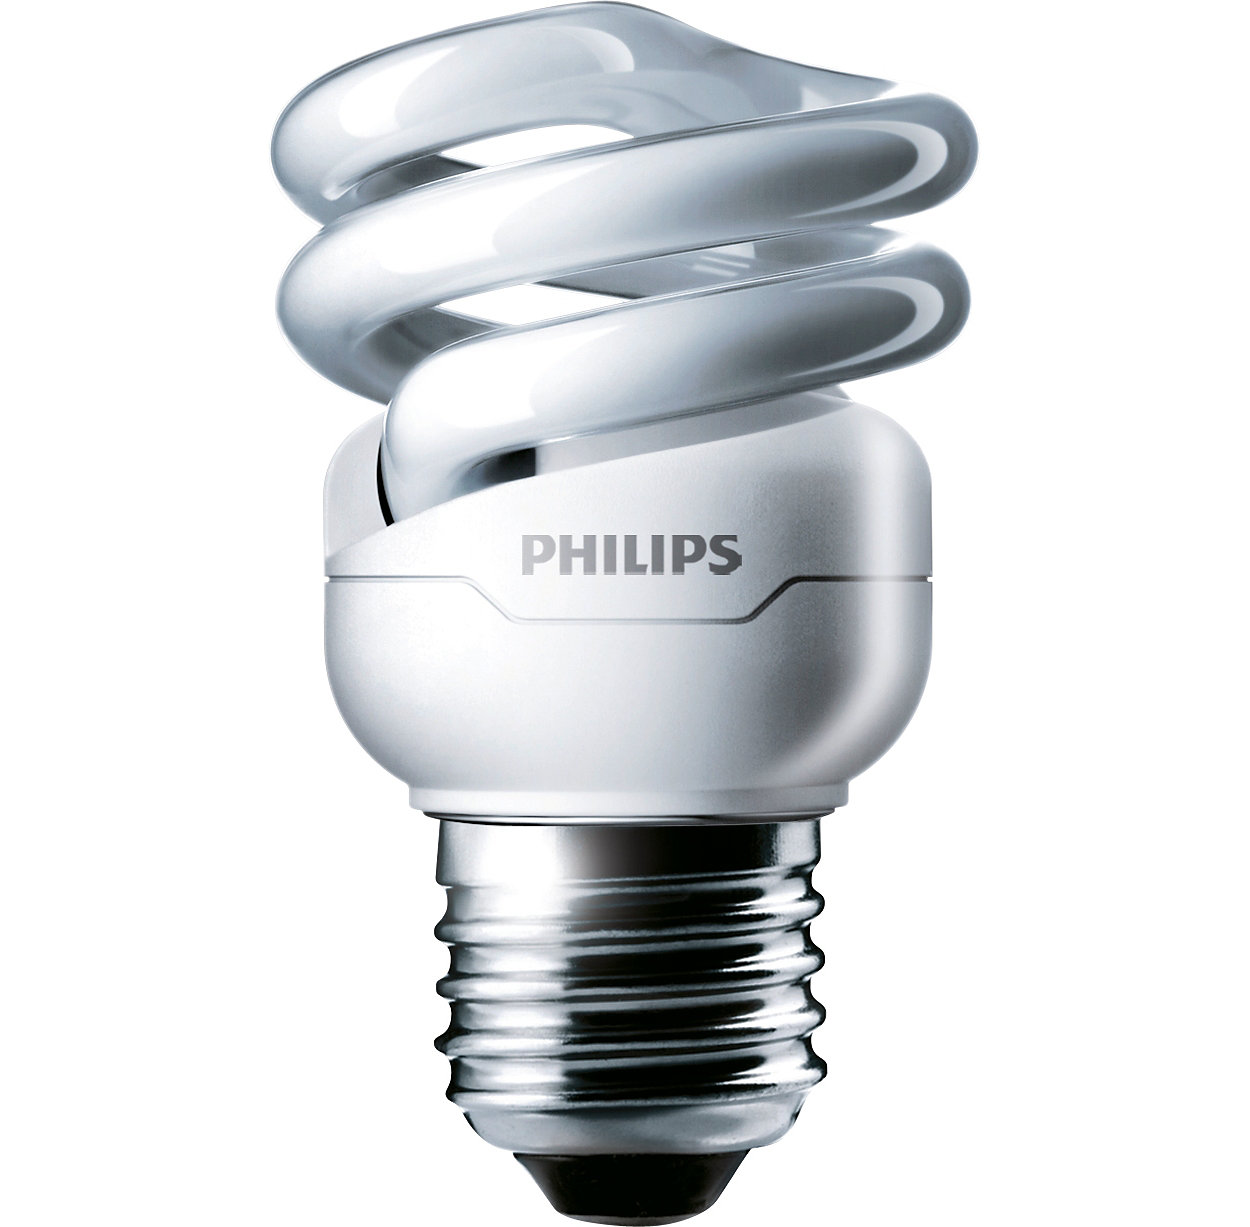 Spreadhead spiral shape energy saving products, preferred by over 90% of consumers